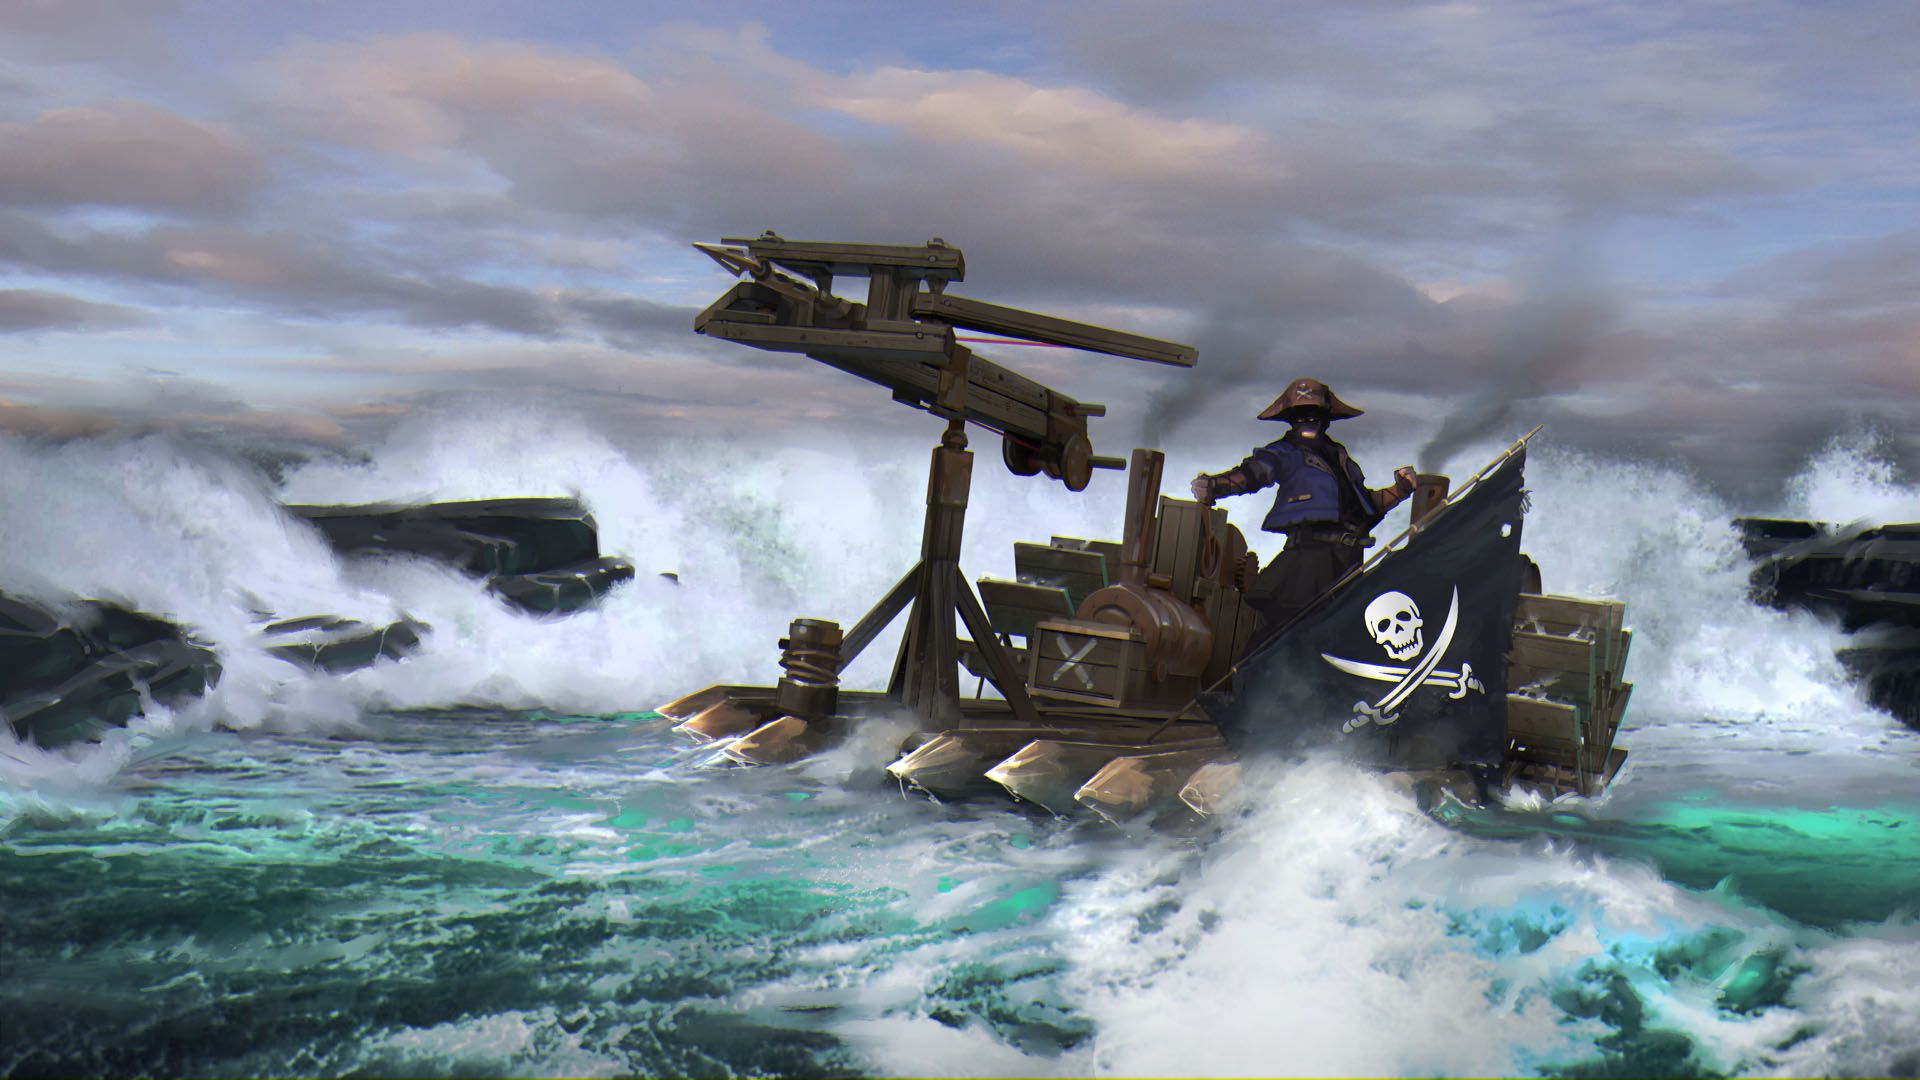 Free download Pirate raft Wallpaper from Out of Reach gamepressurecom [1920x1080] for your Desktop, Mobile & Tablet. Explore Raft Wallpaper. Raft Wallpaper